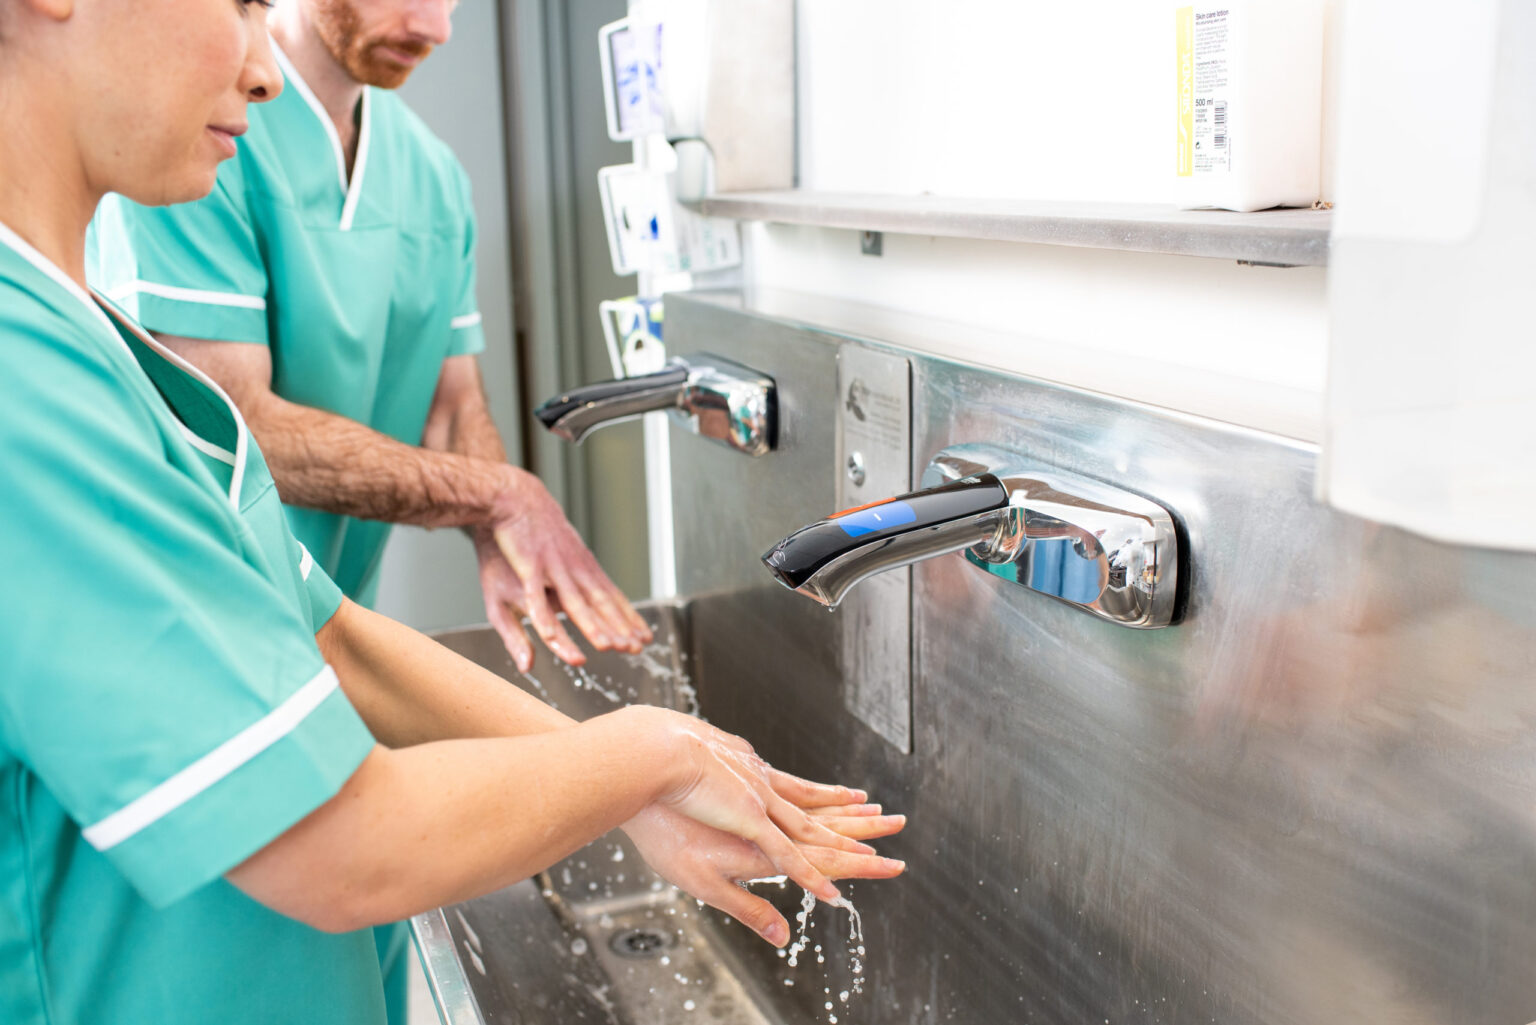 Image of carers washing their hands